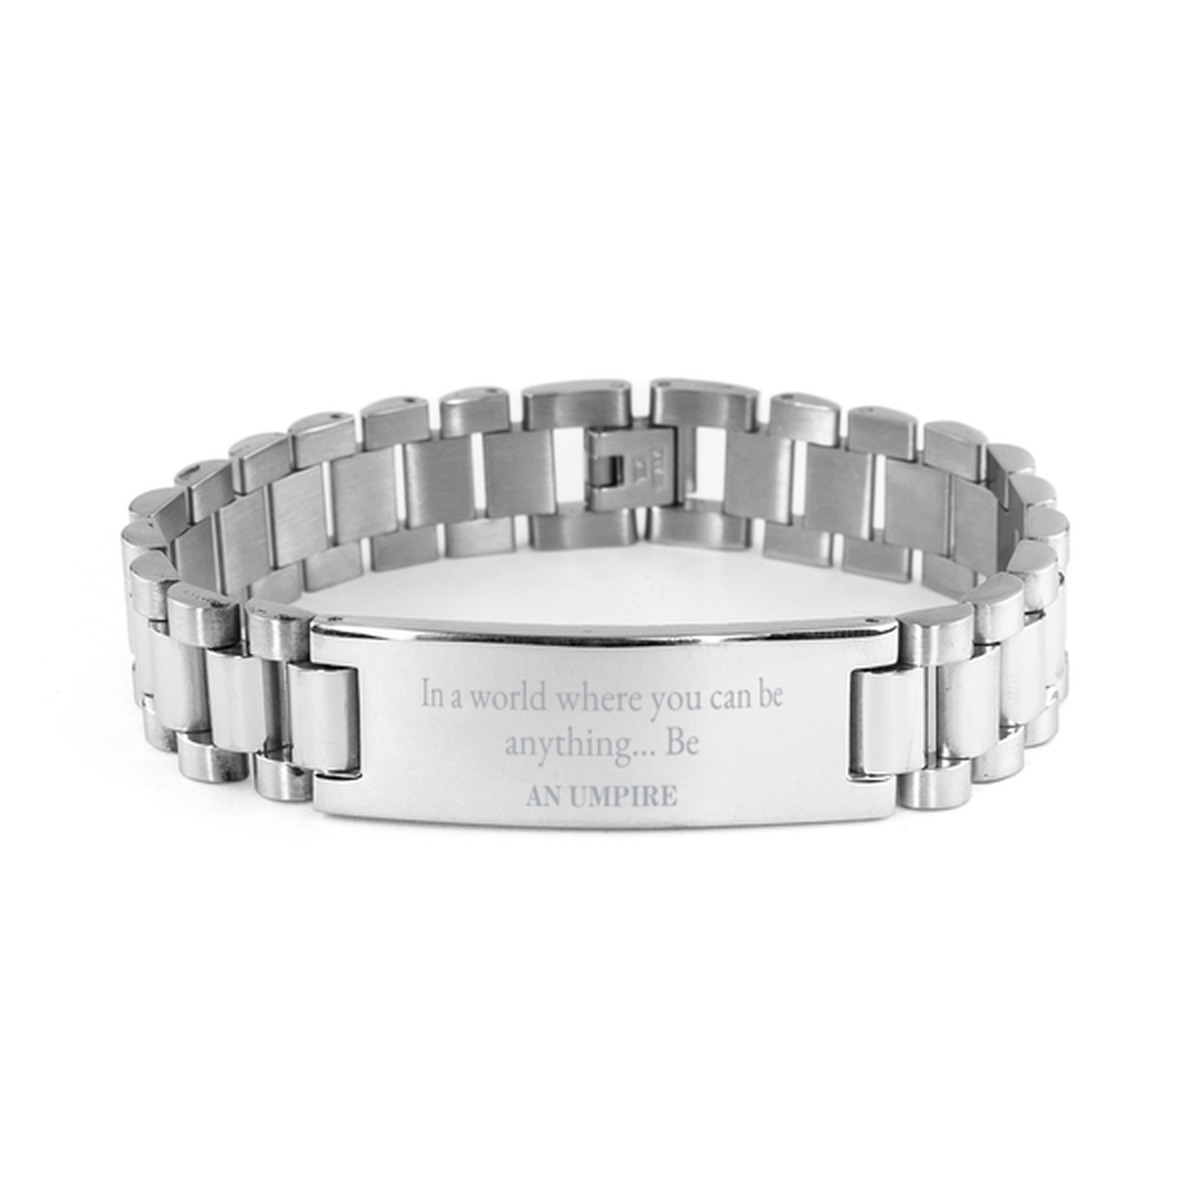 Gifts for Umpire, In a world where you can be anything, Appreciation Birthday Ladder Stainless Steel Bracelet for Men, Women, Friends, Coworkers